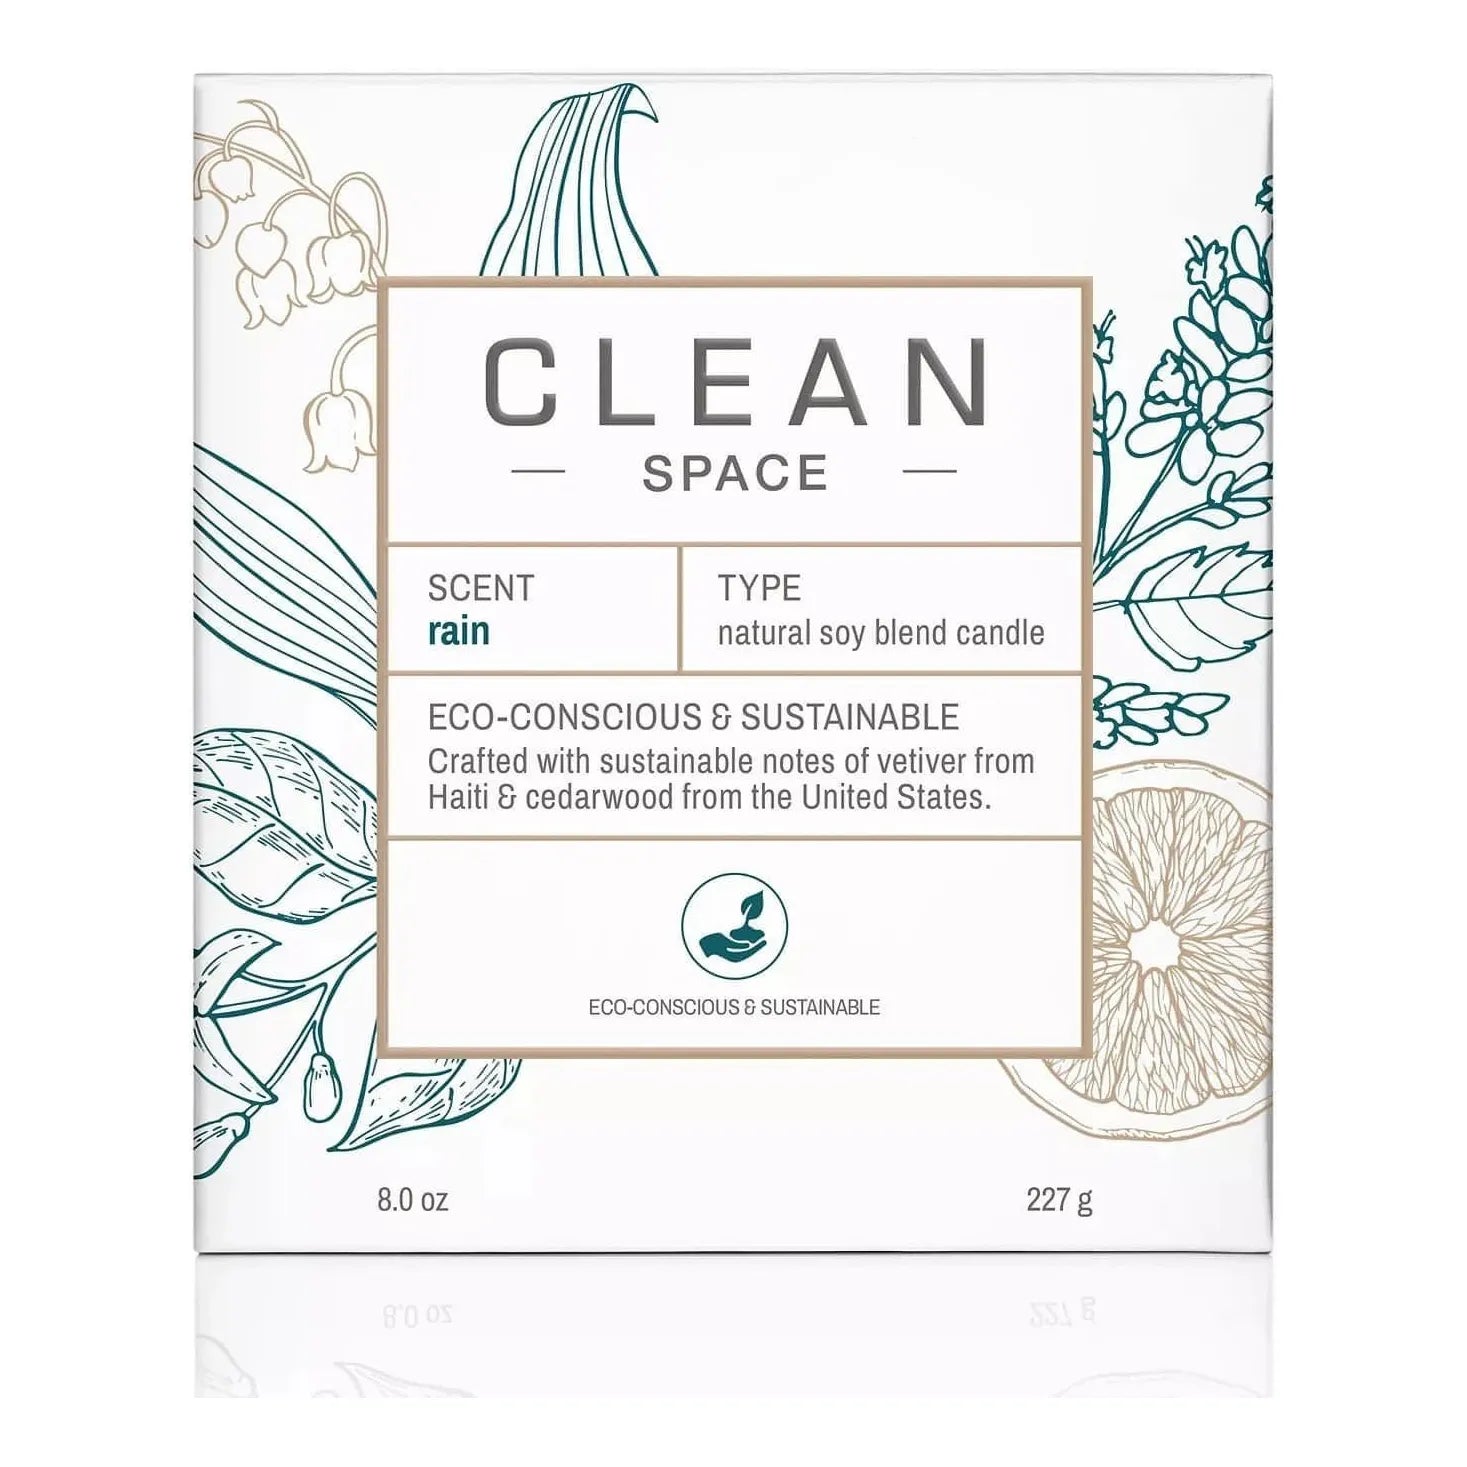 CLEAN Fragrance-Candle -CLEAN SPACE Candle | Rain | Natural Soy Blend Scented Candle | Premium Non-Toxic Candle Made with Sustainable Ingredients | Up to 40 Hour Burn Time | 8 oz - Brandat Outlet